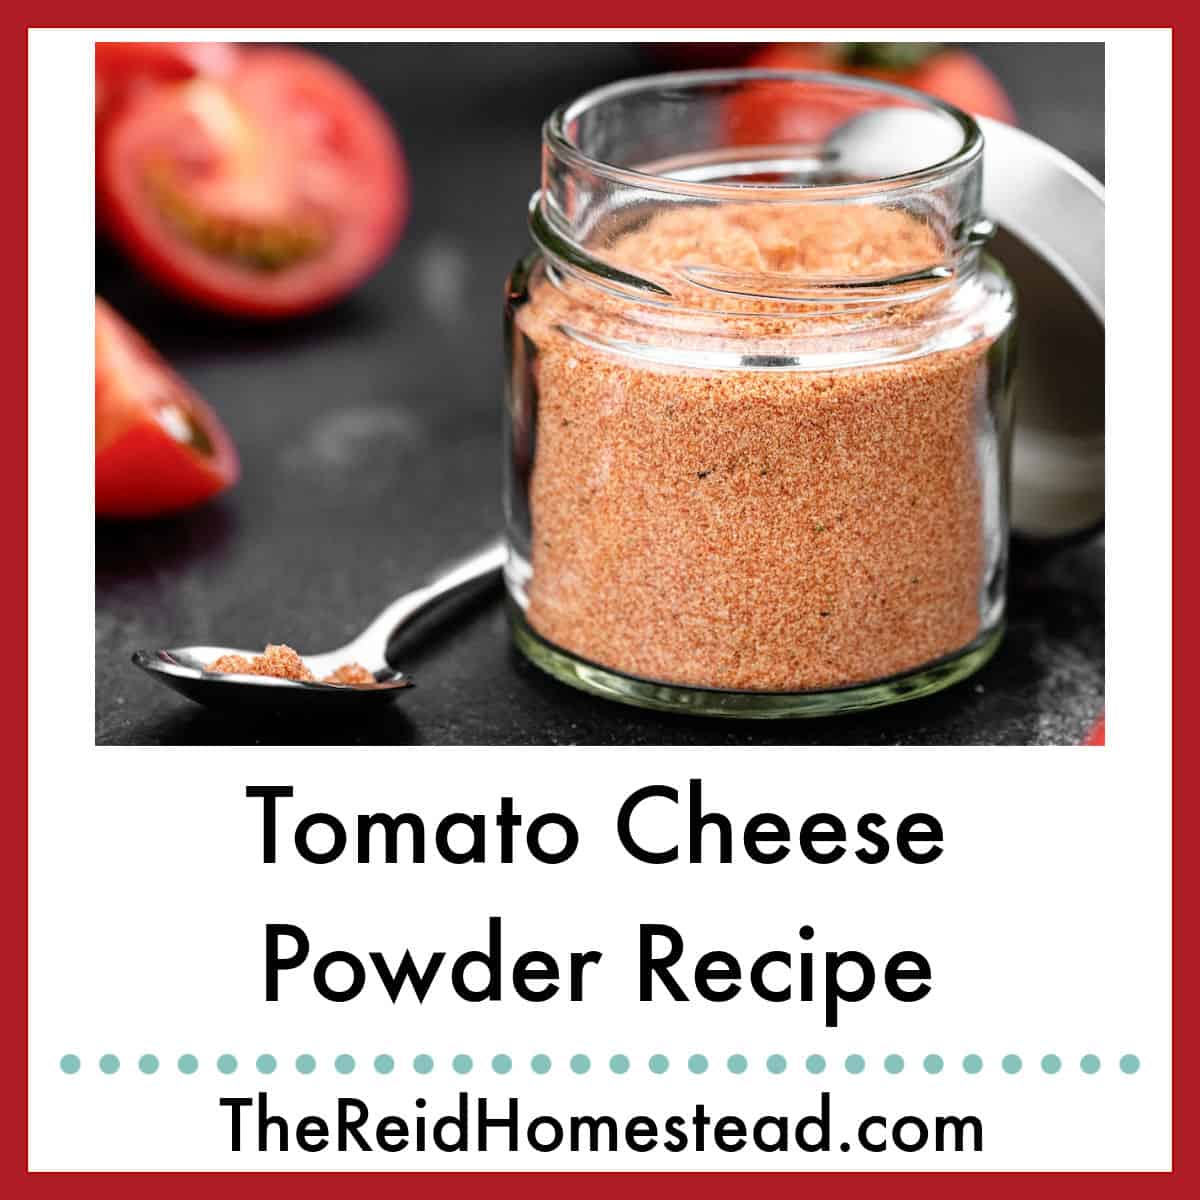 tomato cheese powder in glass jar with text overlay Tomato Cheese Powder Recipe